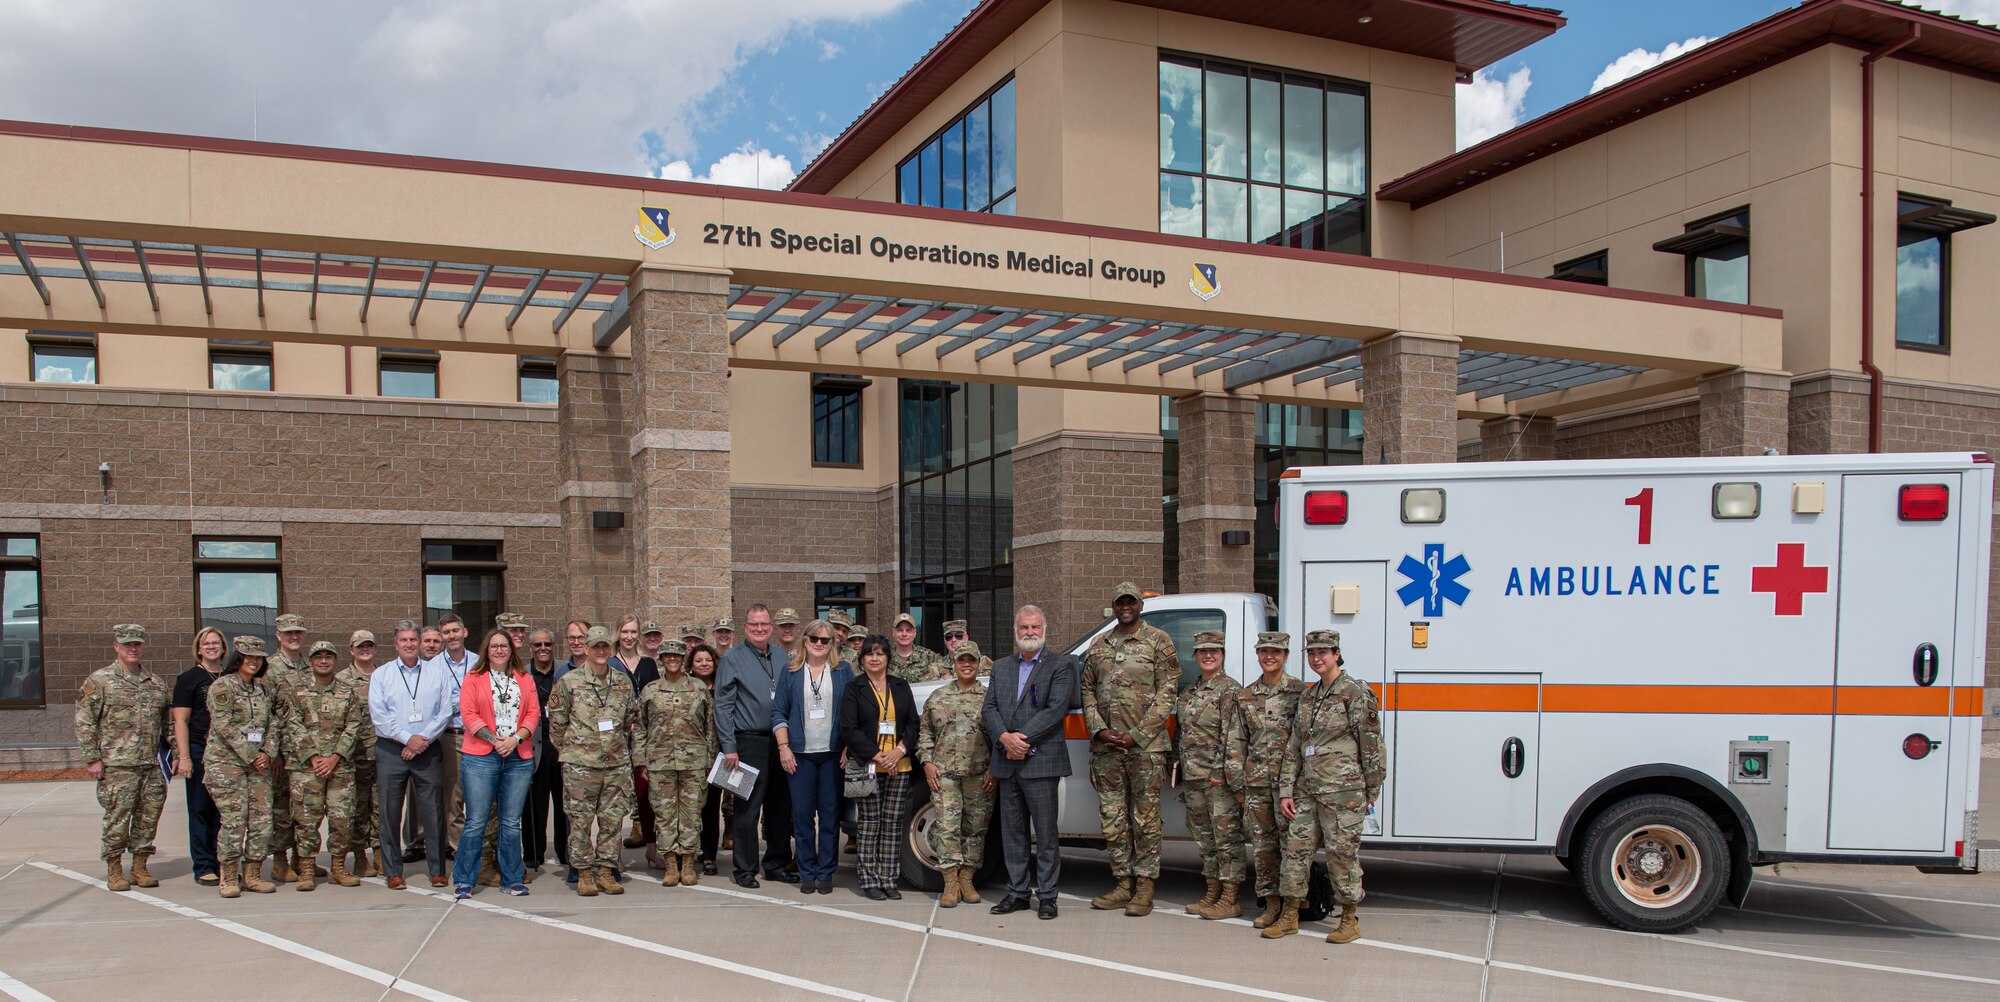 Participants of the Medical Support Summit pose for a photo outside the 27th Special Operations Medical Group clinic